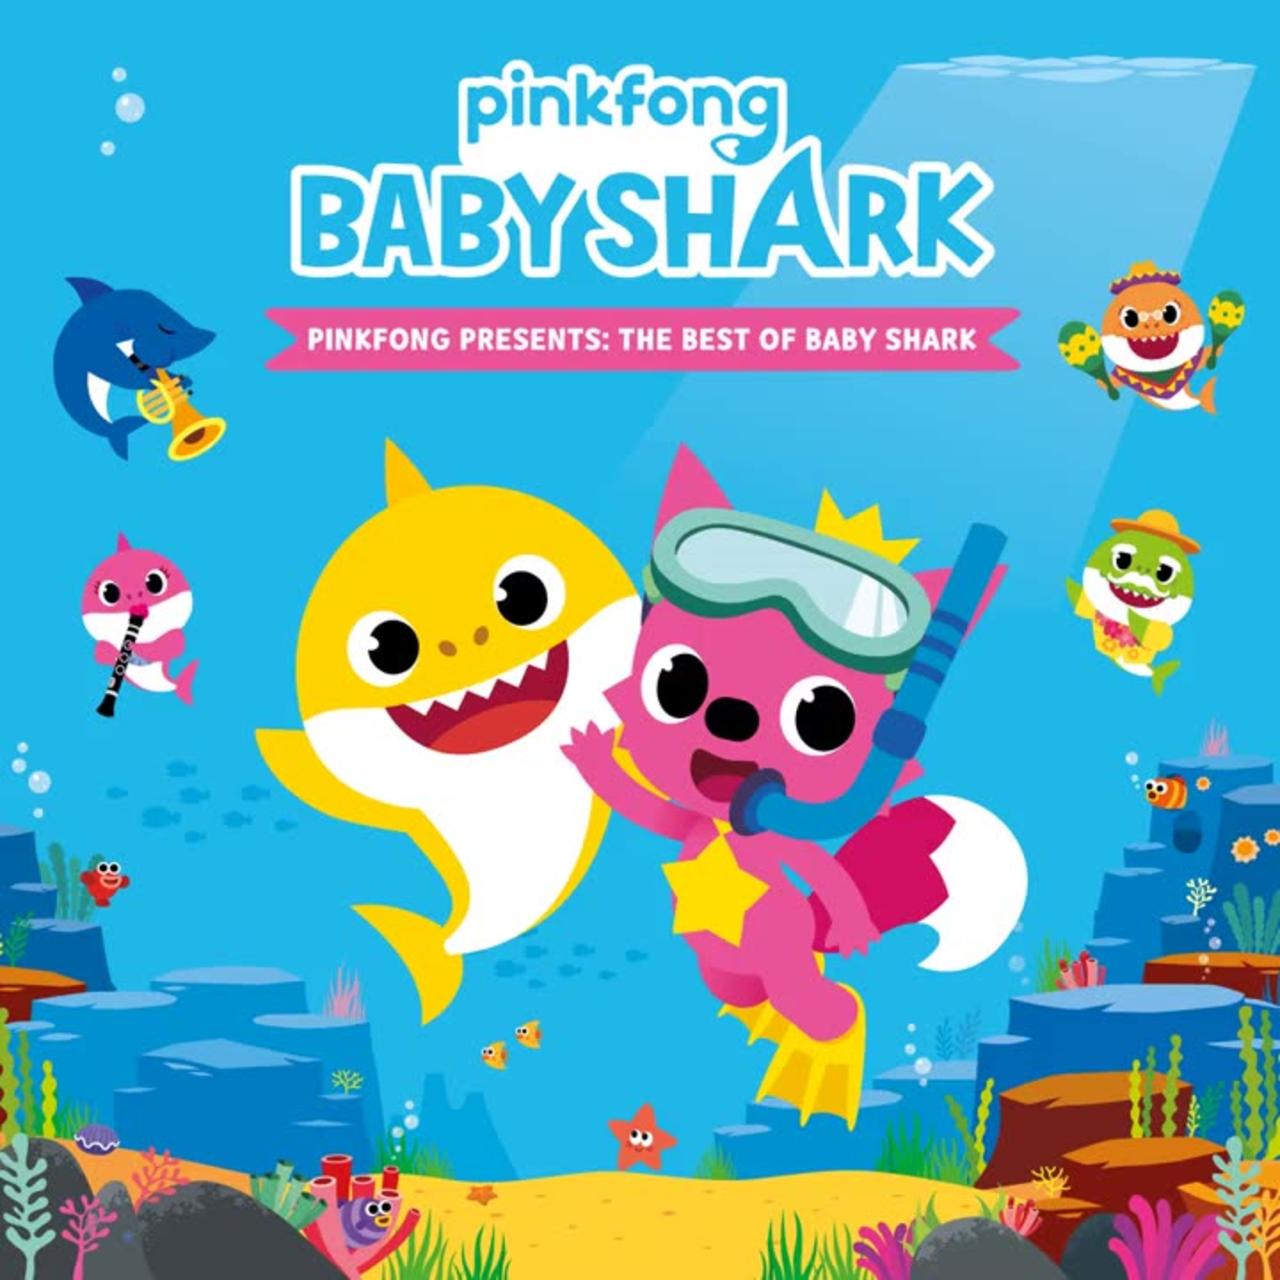 The most popular Baby Shark song